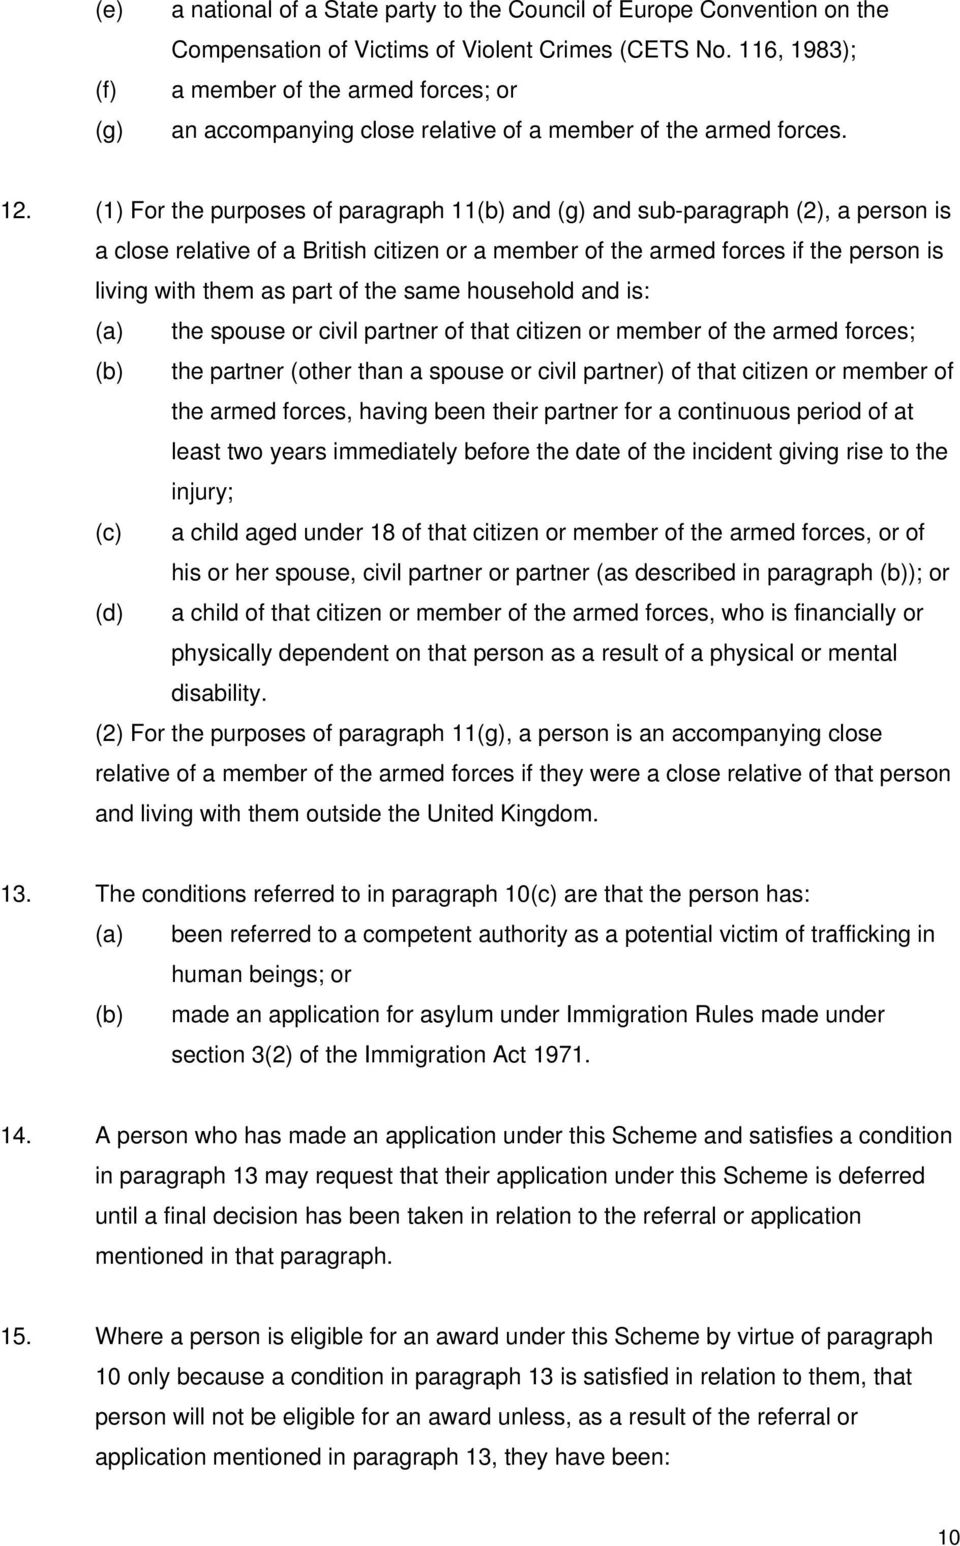 (1) For the purposes of paragraph 11(b) and (g) and sub-paragraph (2), a person is a close relative of a British citizen or a member of the armed forces if the person is living with them as part of